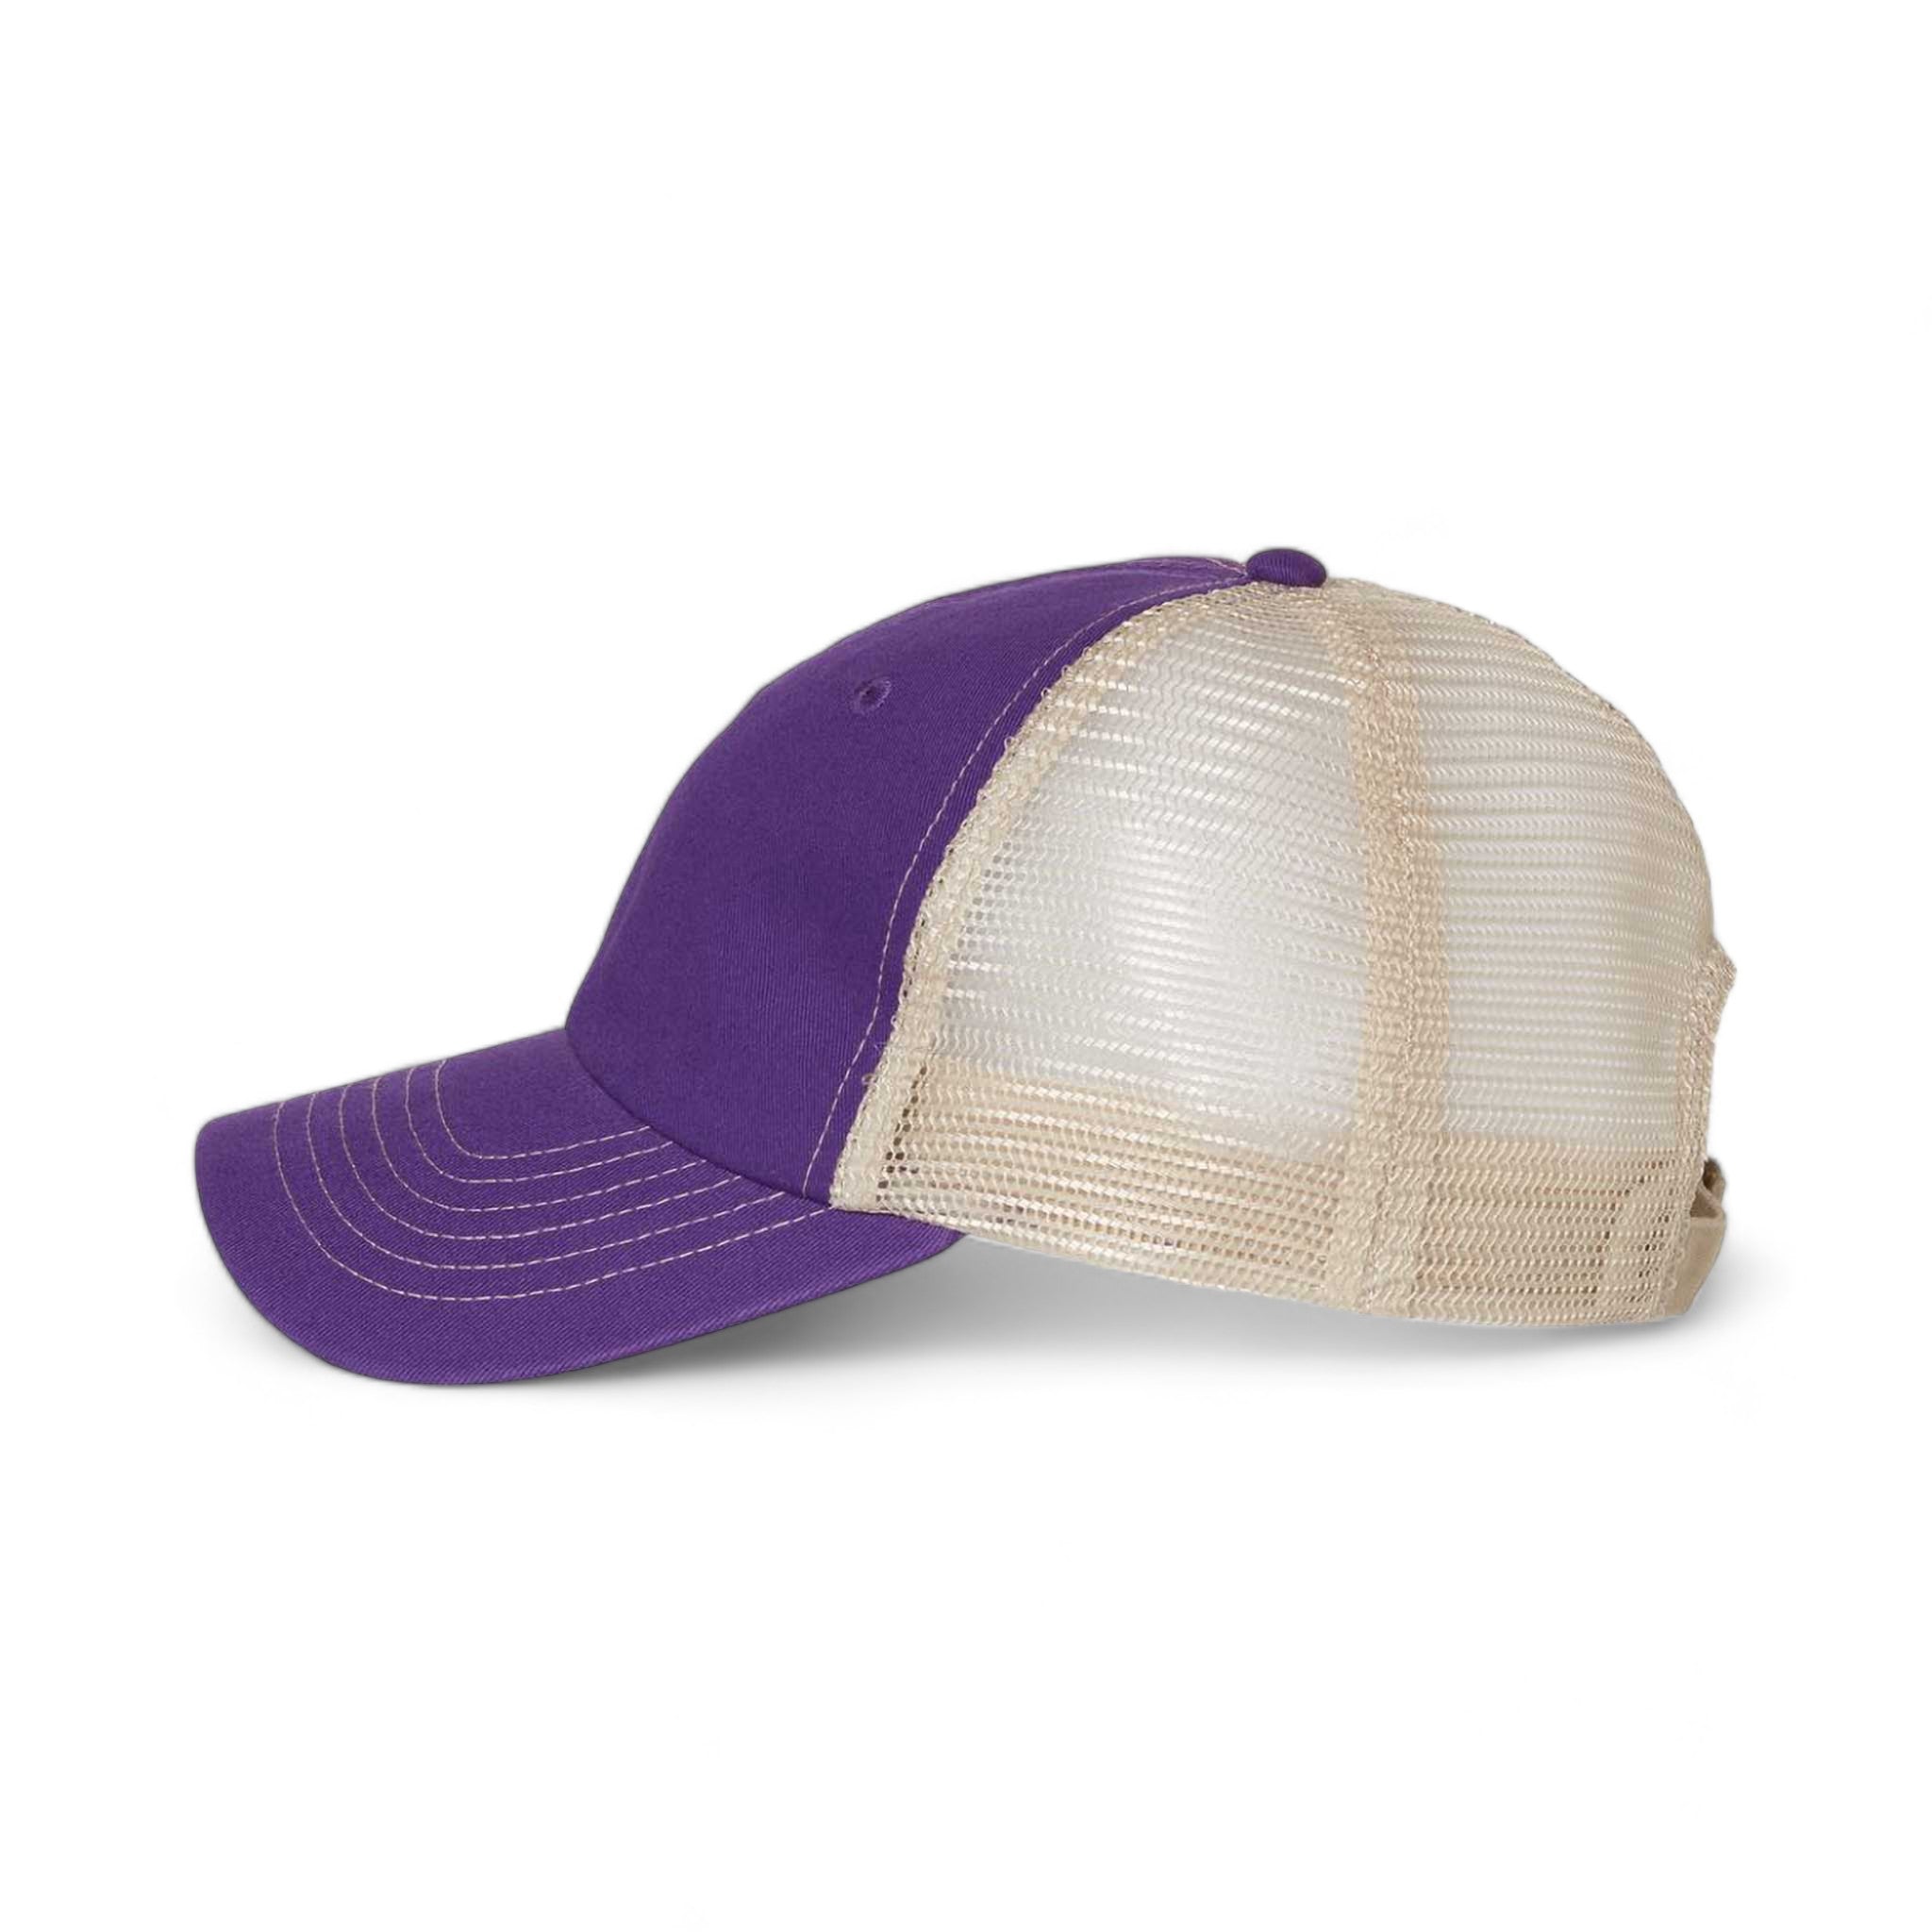 Side view of Sportsman 3100 custom hat in purple and stone